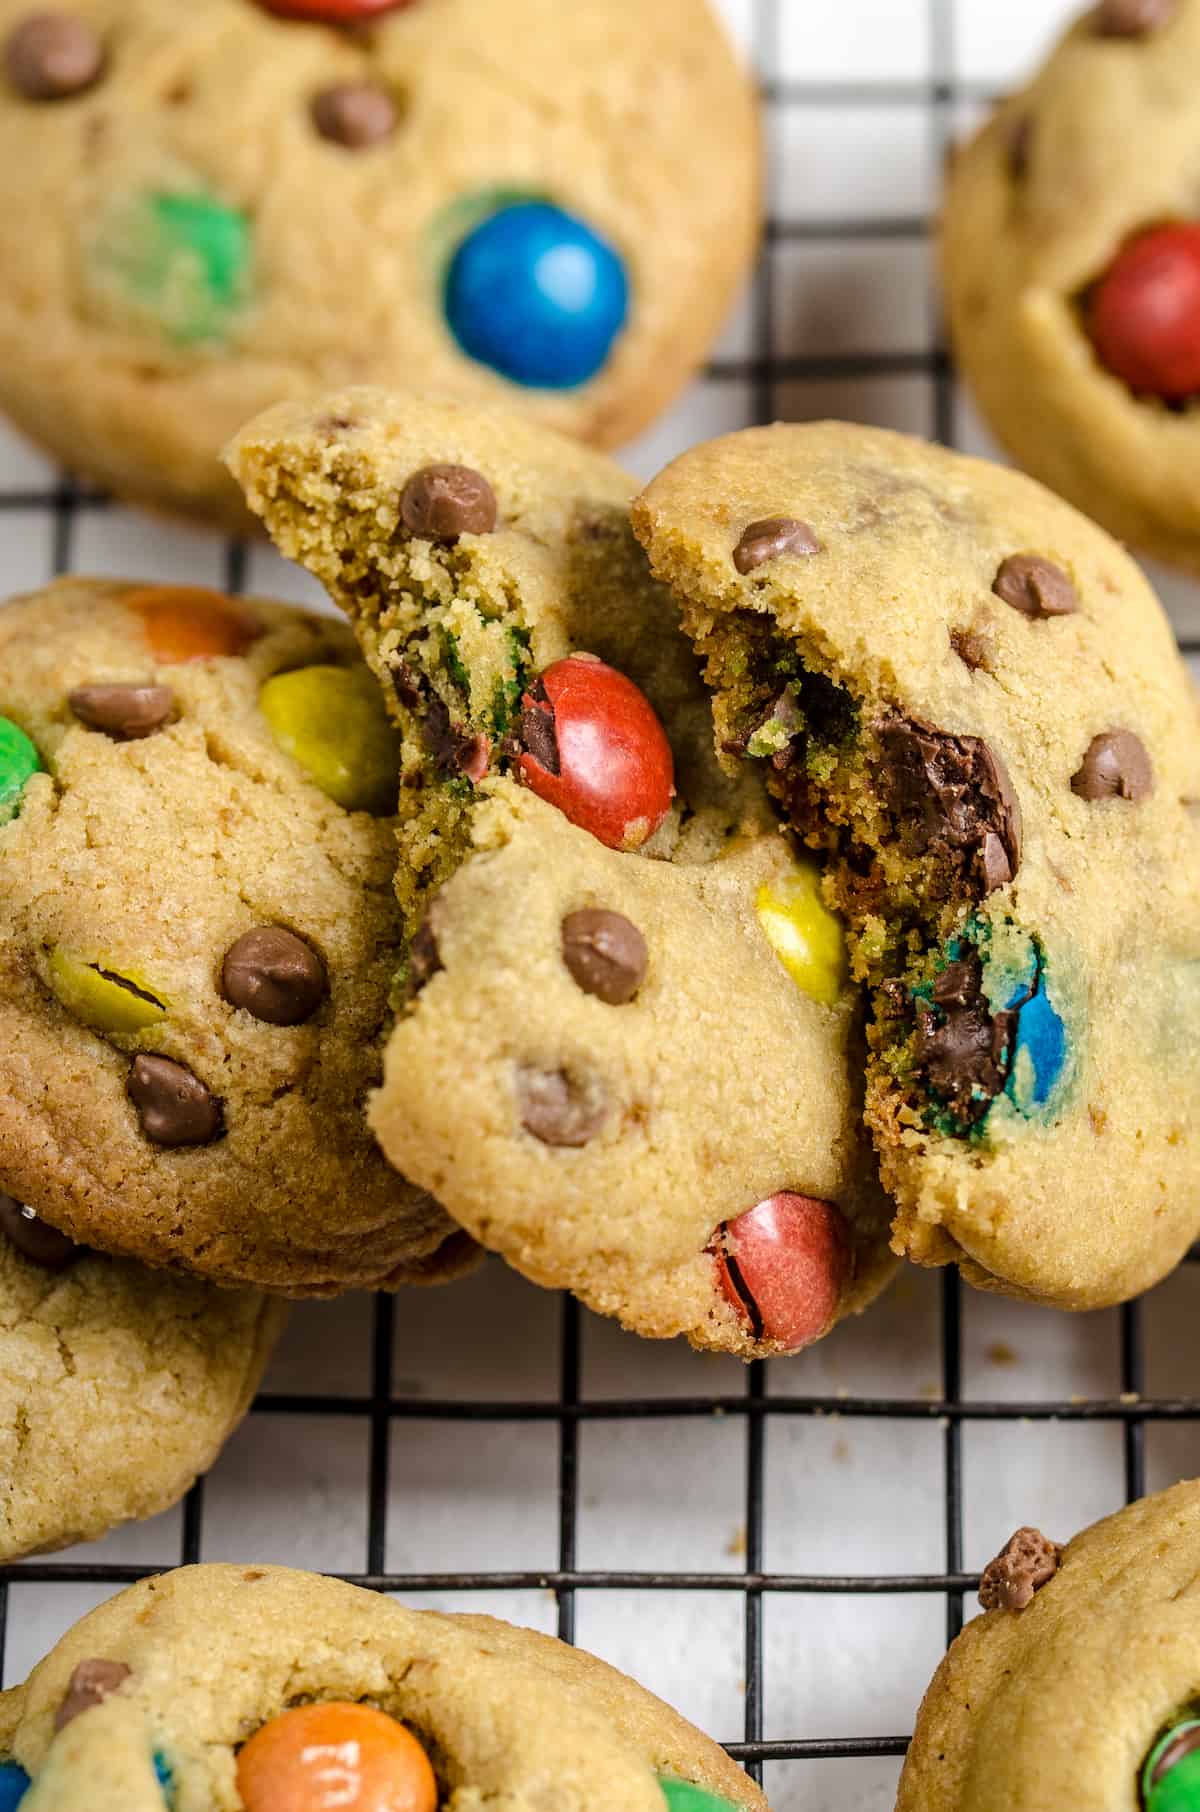 A close-up shot of two M&M cookies with a bite taken out of each one